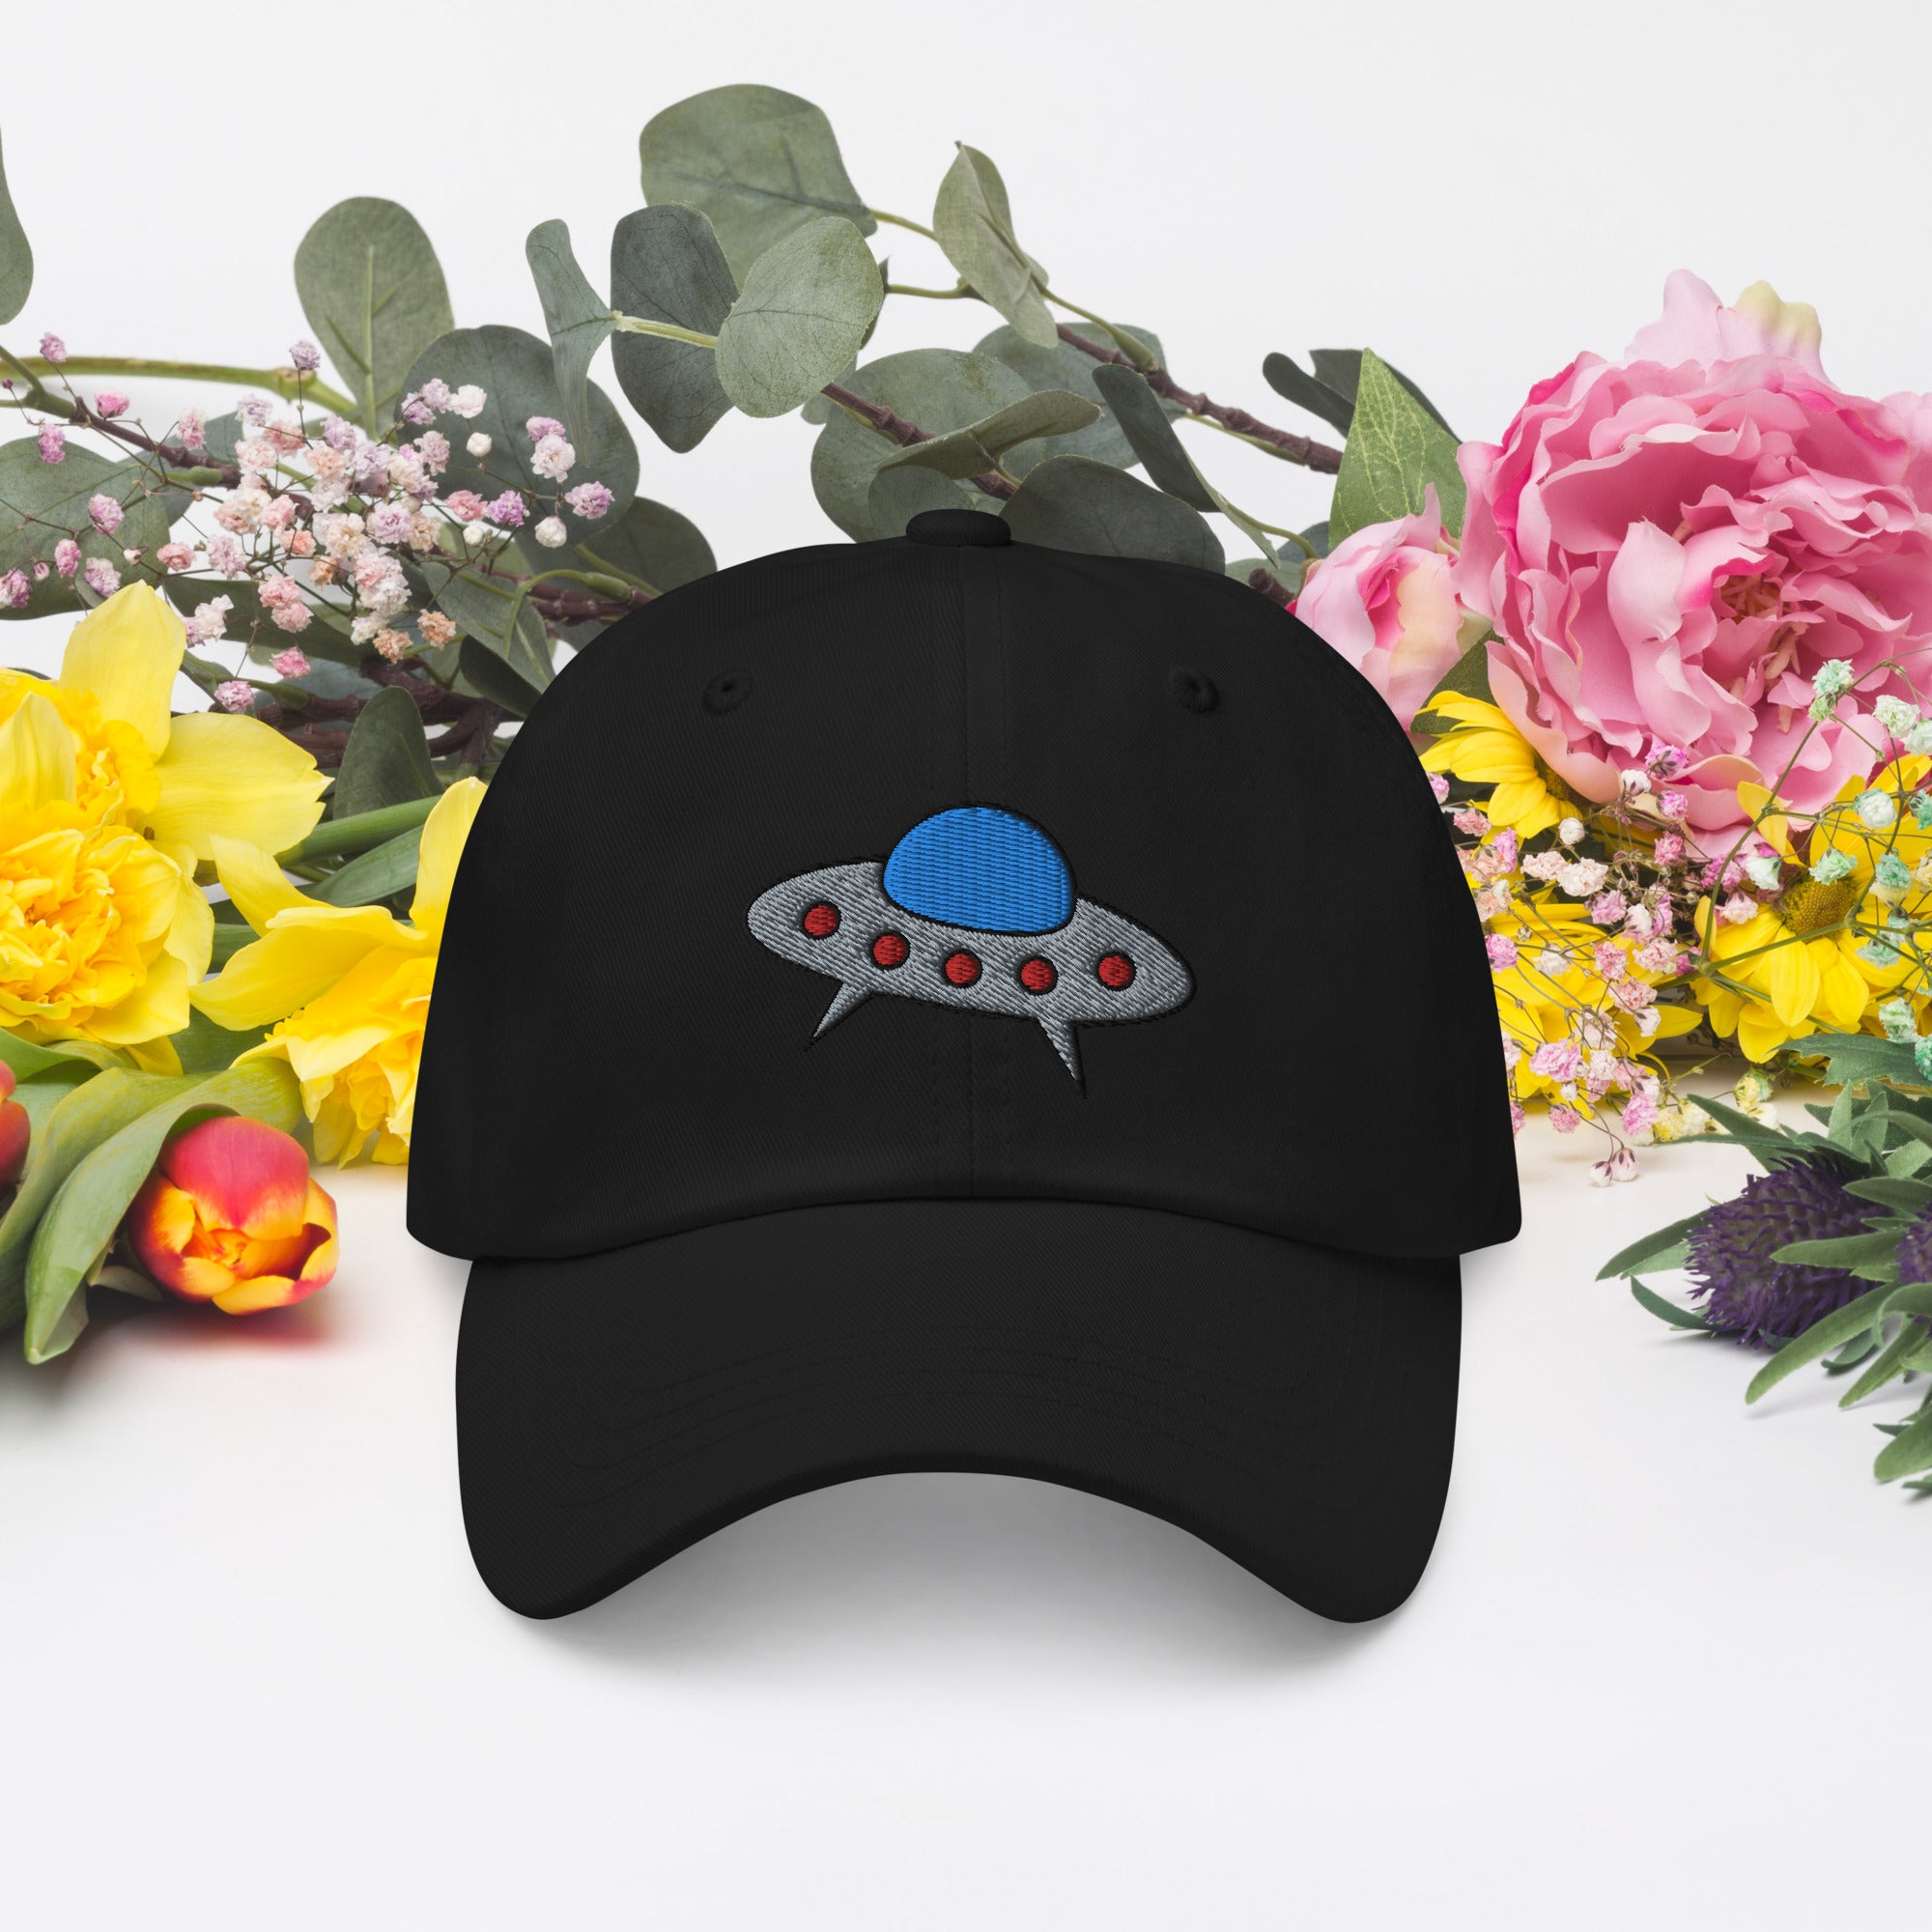 Space Alien Ship UFO Flying Saucer Embroidered Baseball Cap Dad hat - Edge of Life Designs